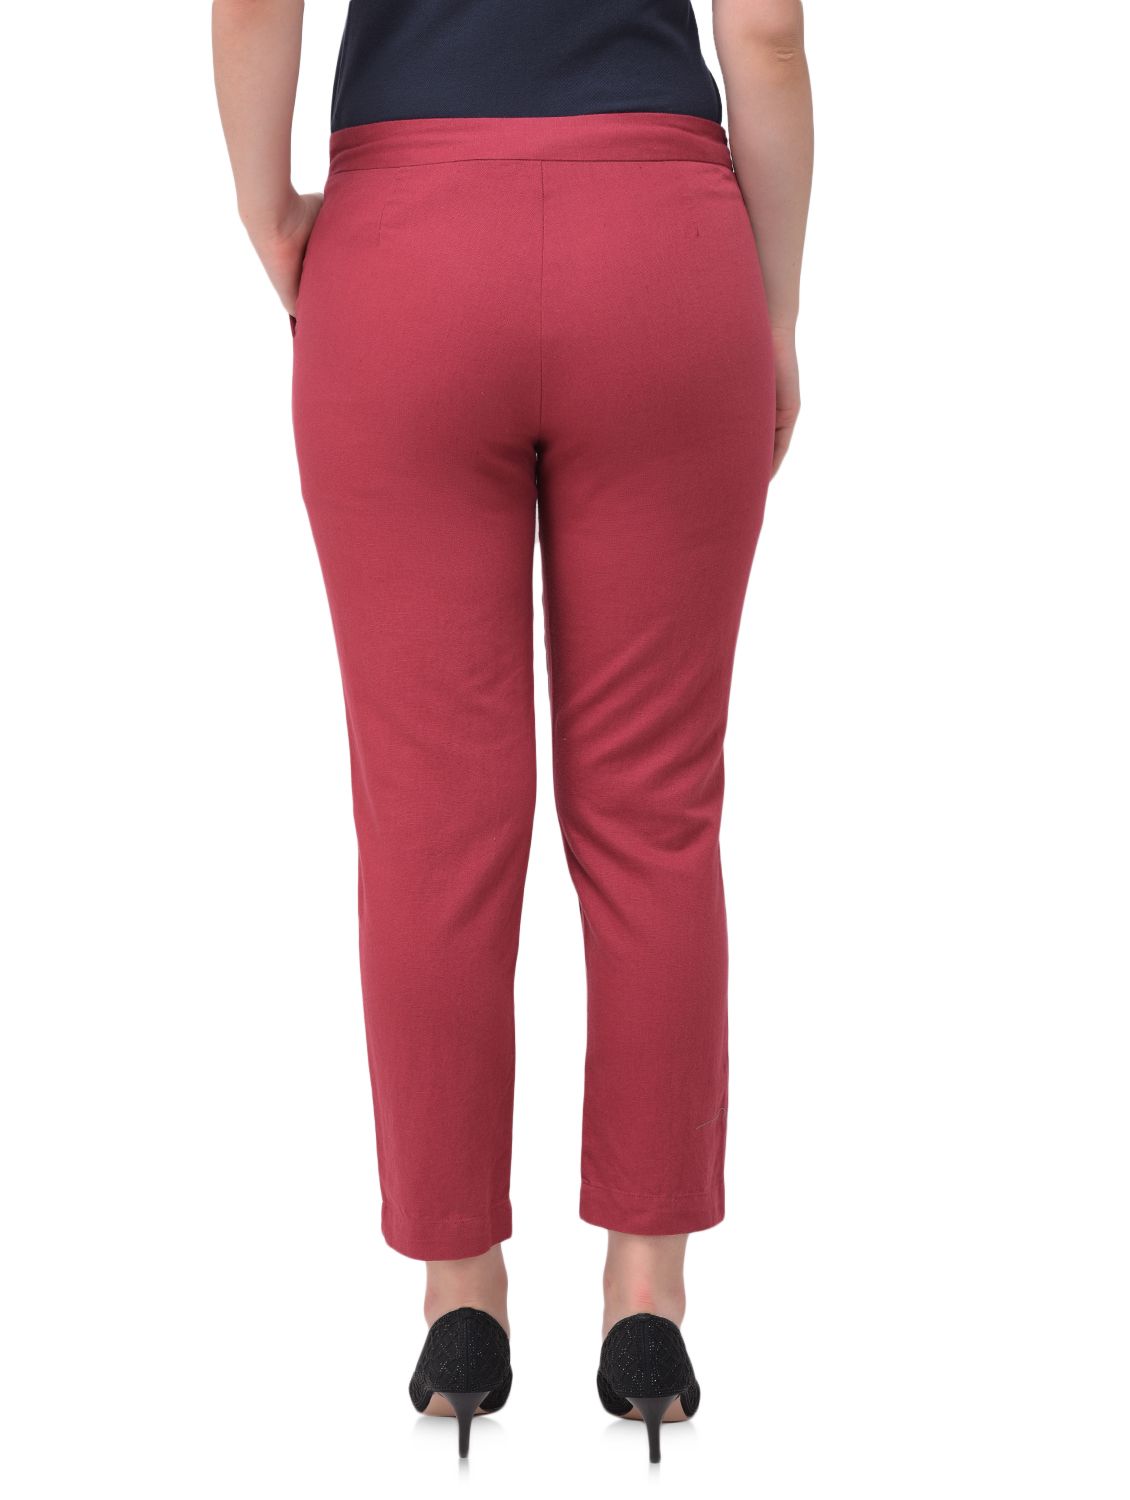 Beet red trousers for women